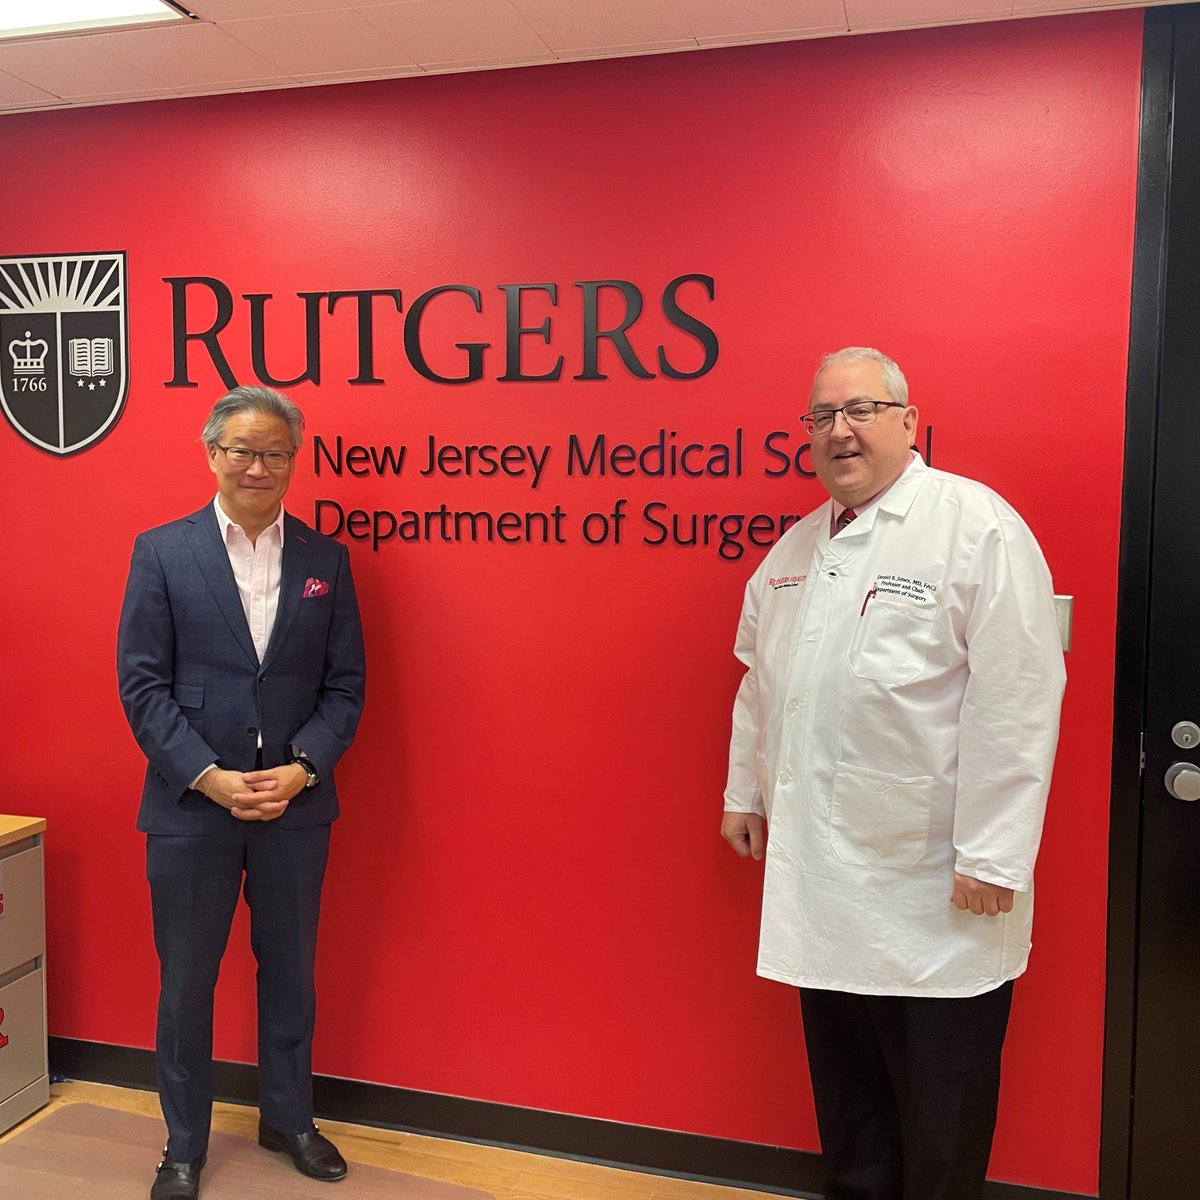 Today we welcomed Dr. Leonard Lee, chair of the Department of Surgery @RWJMS @rwjsurgery for #grandrounds 'Update on Cardiac Surgery: A Minimalist Approach'. So great to have Rutgers family visit! #cardiacsurgery #nj